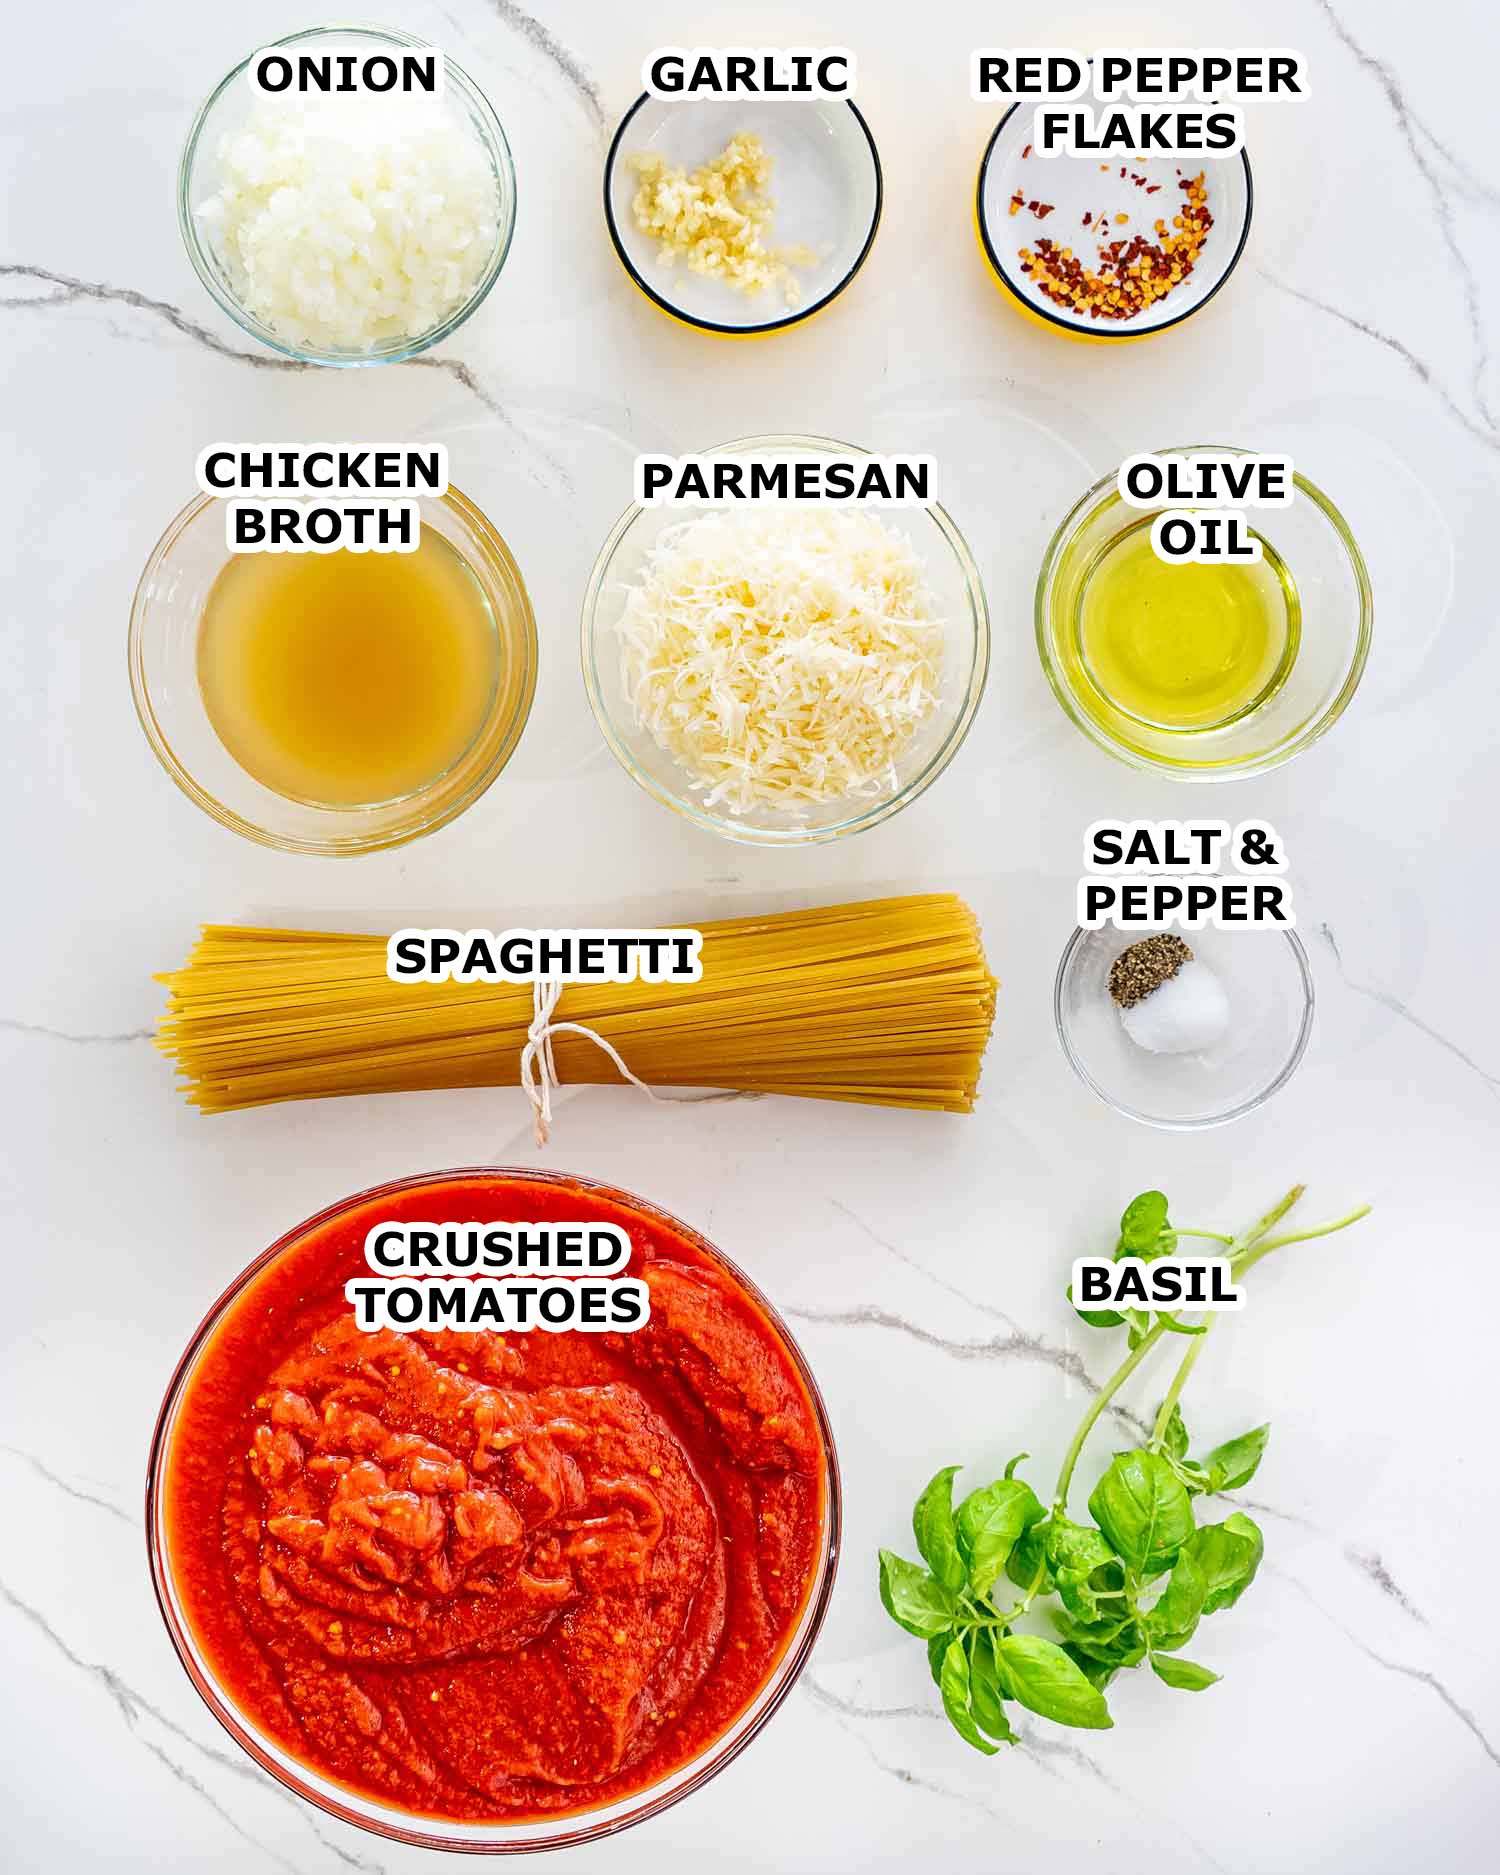 ingredients needed to make spaghetti and meatballs.